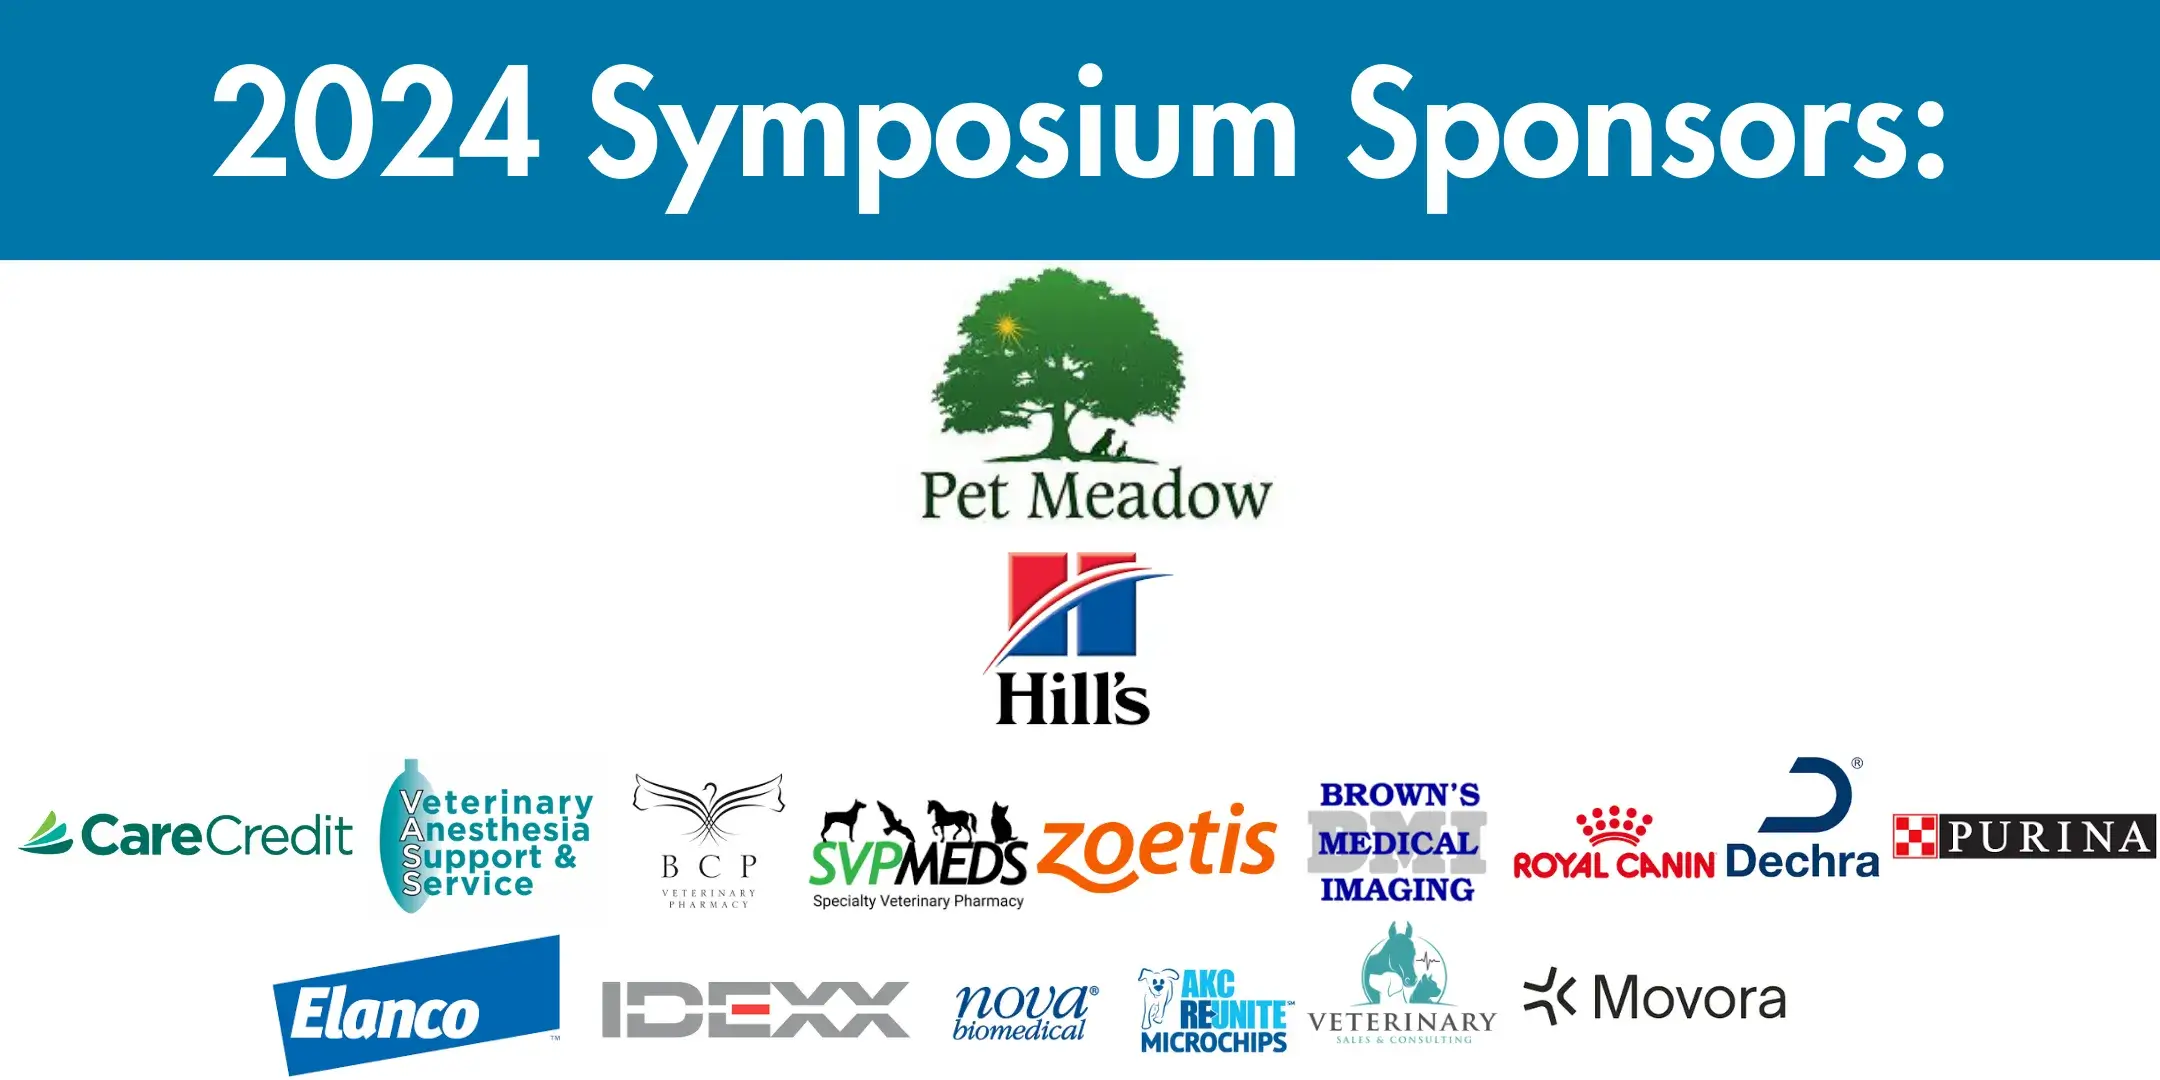 2024 Symposium Sponsors: Pet Meadow, Hill's, CareCredit, Veterinary Anesthesia Support & Service, BCP Veterinary Pharmacy, SVP Meds, Zoetis, Brown's Medical Imaging, Royal Canin, Dechra, Purina, Elanco, IDEXX, Nova Biomedical, AKC Reunite Microchips, Veterinary Sales & Consulting, and Movora. Logos of each sponsor are displayed.